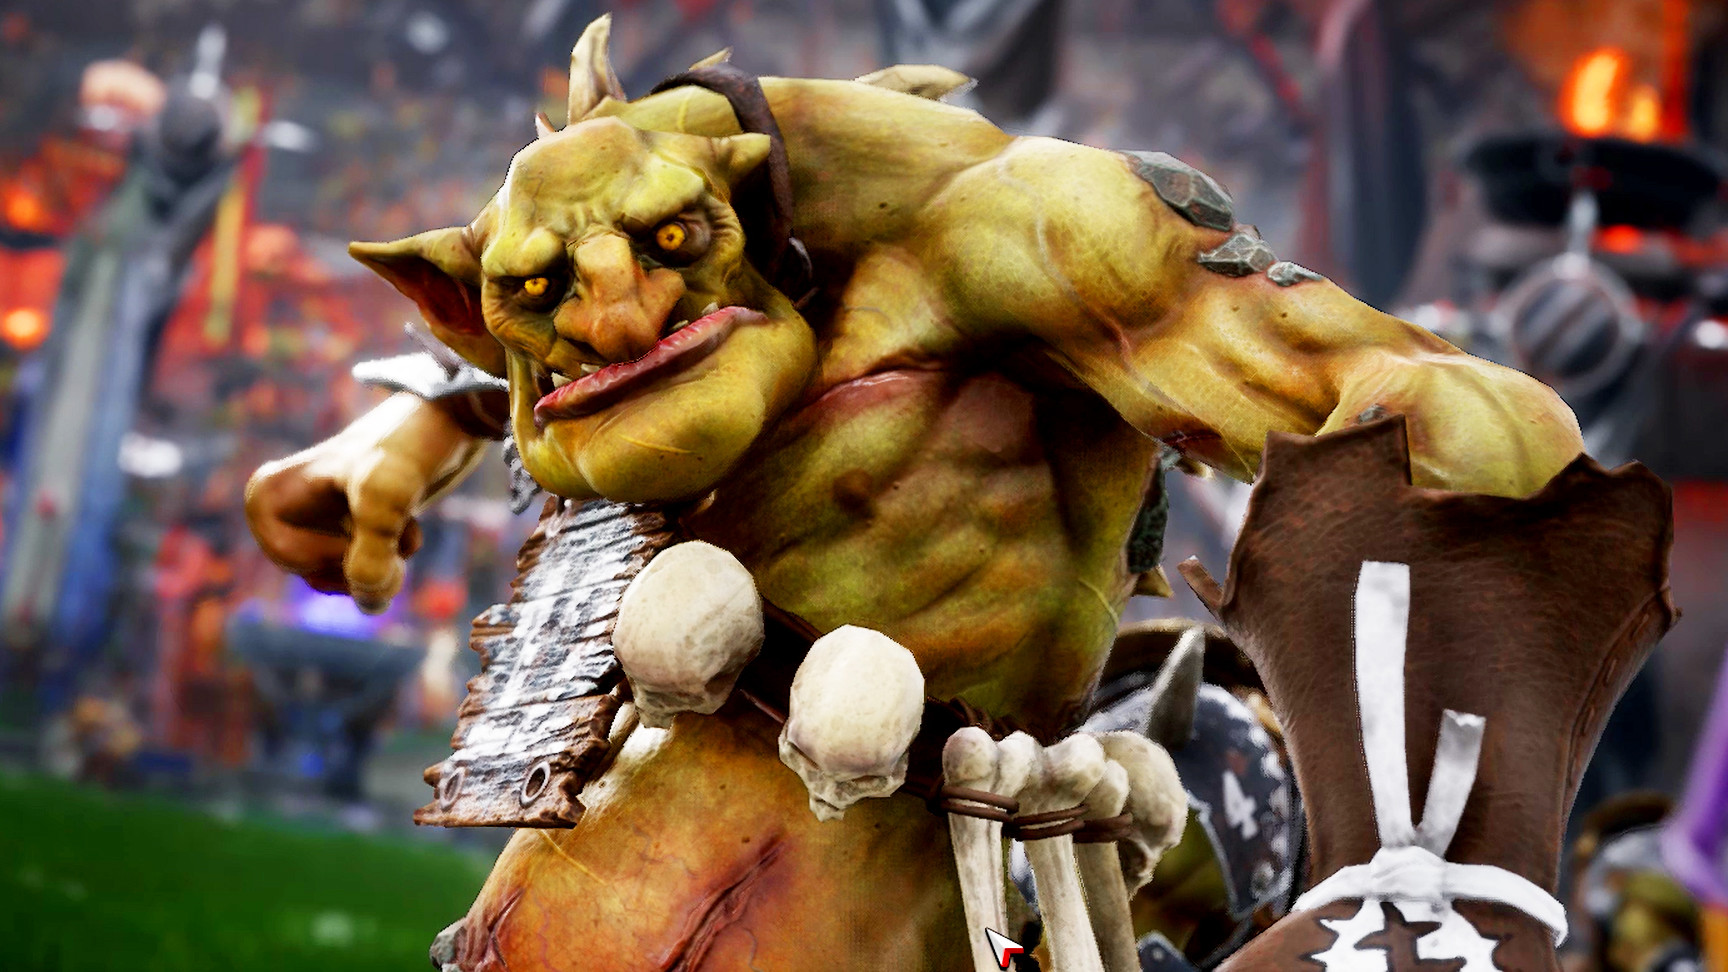 Blood Bowl 3 gets February 2023 release date for PC and consoles